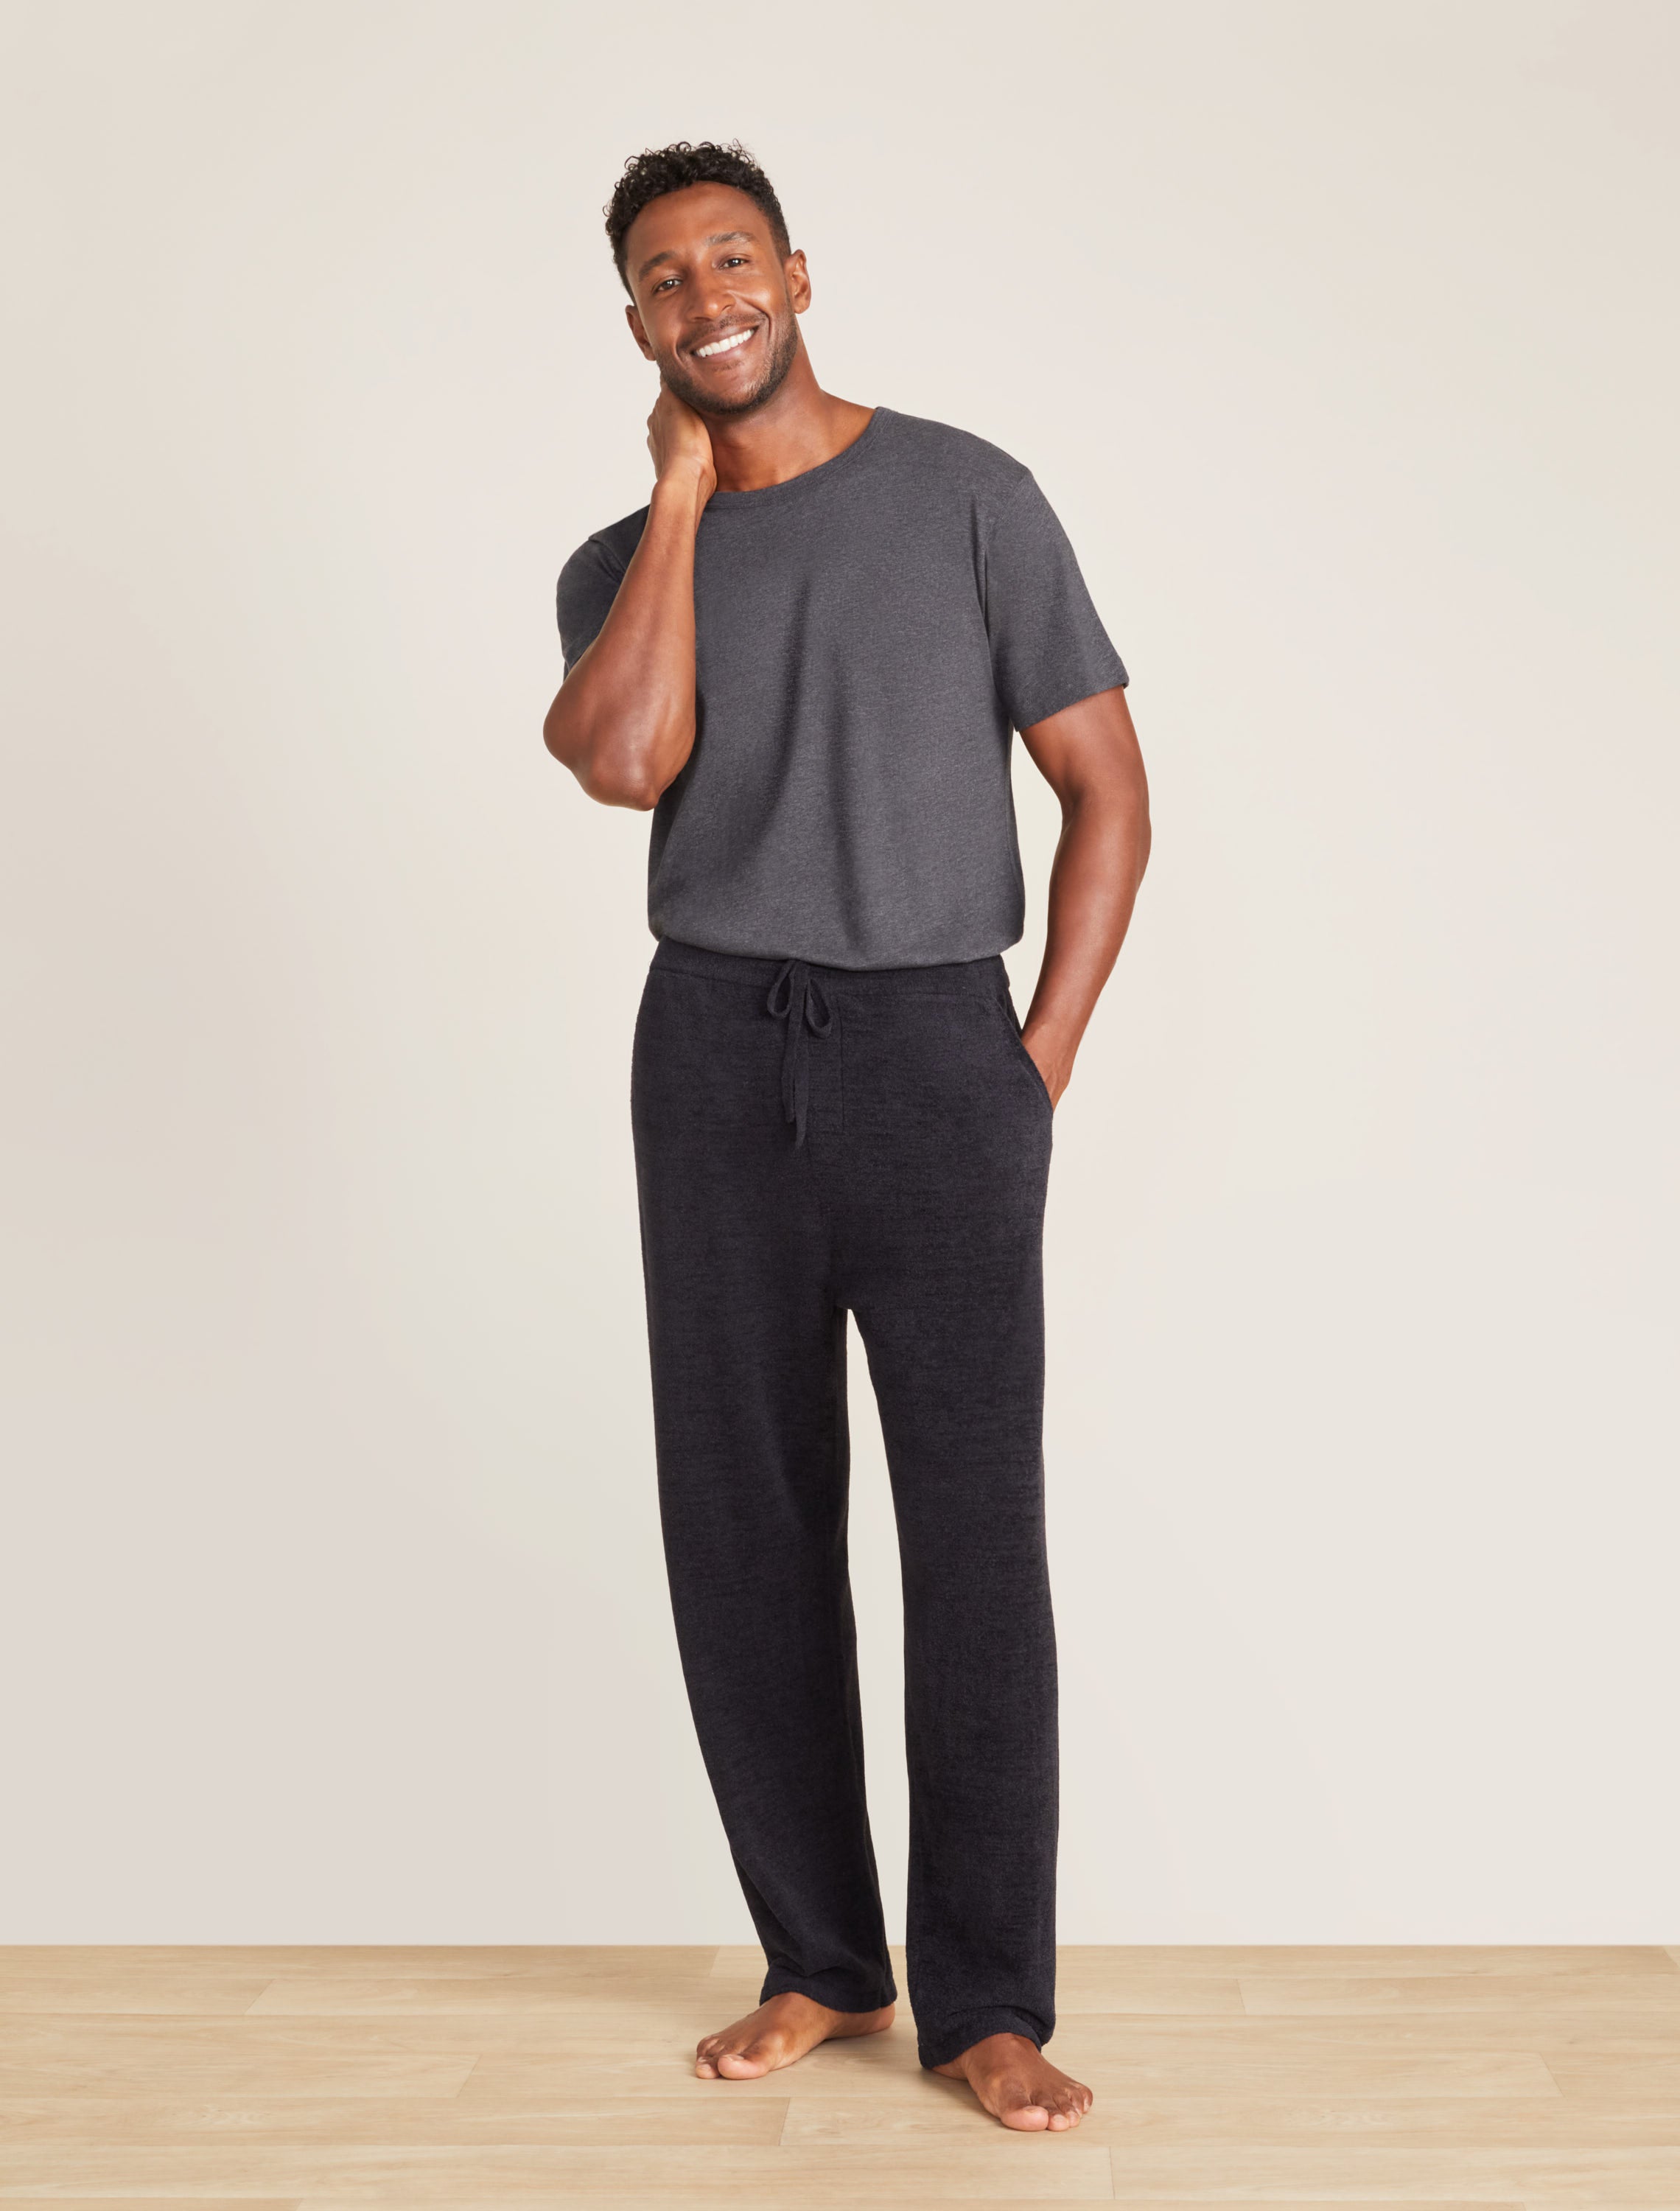 Men's Lounge Pants You'll Want to Show Off | Bergdorf Goodman